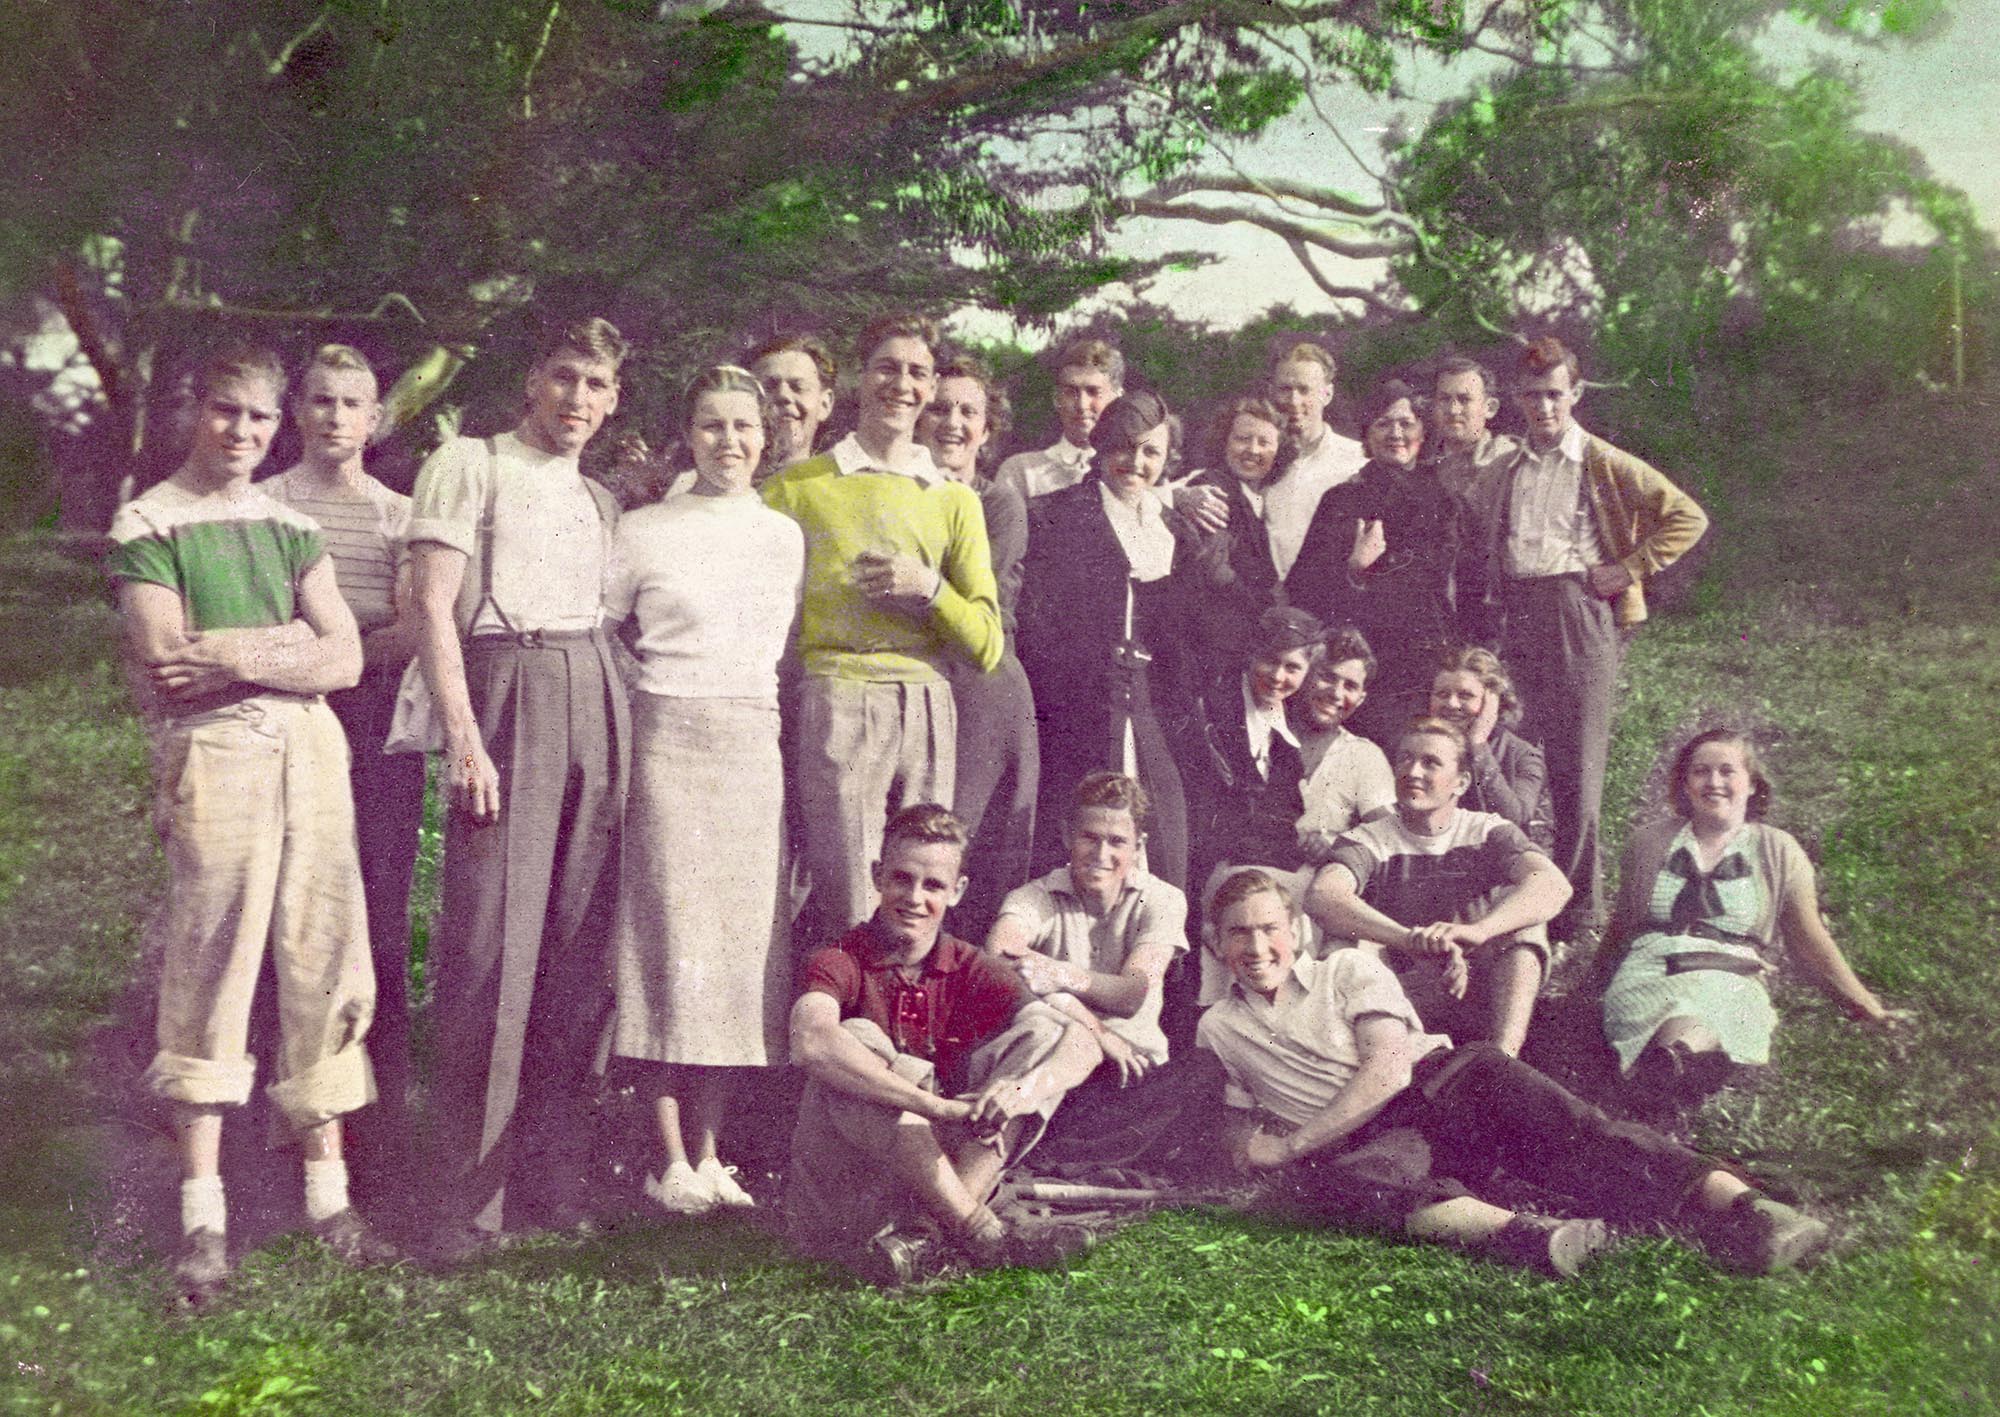 A hand-painted photo of the Student Teacher Academic Group at San Francisco State University. February 13, 1936.